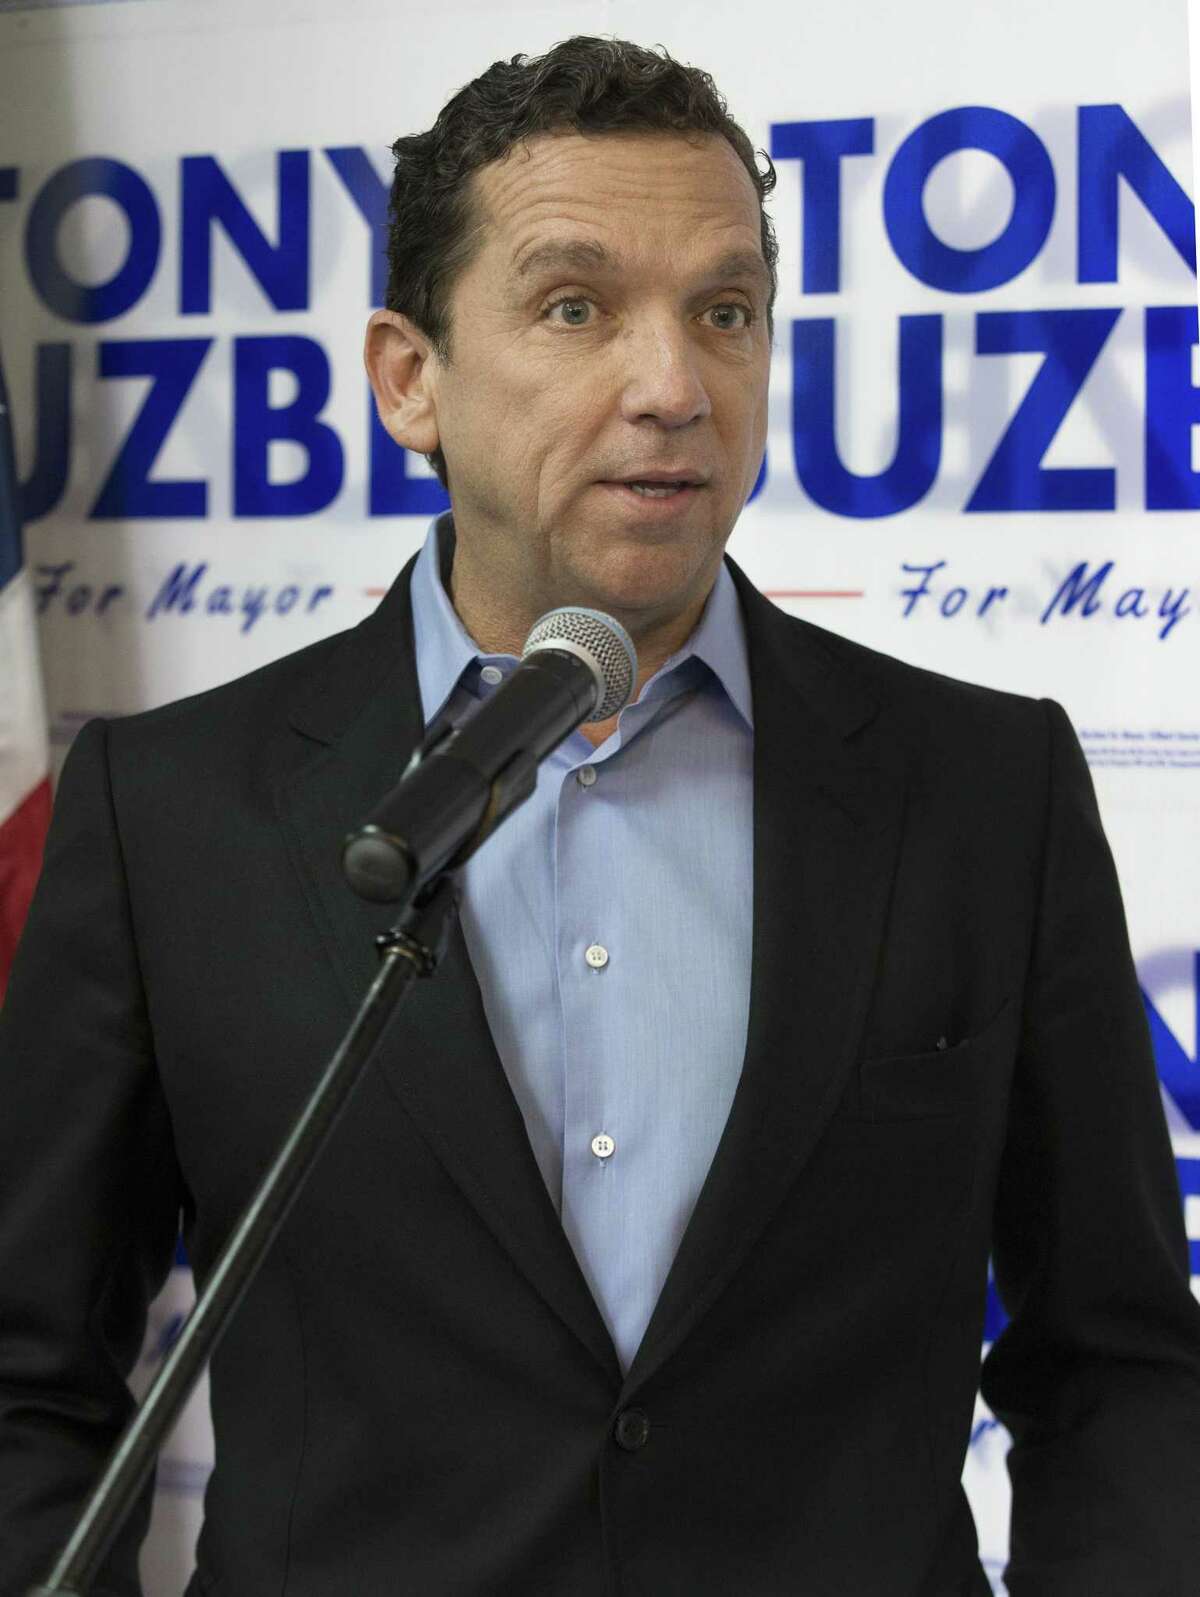 High-profile lawyer Tony Buzbee has challenged the mayor over his long-running wage dispute with firefighters.